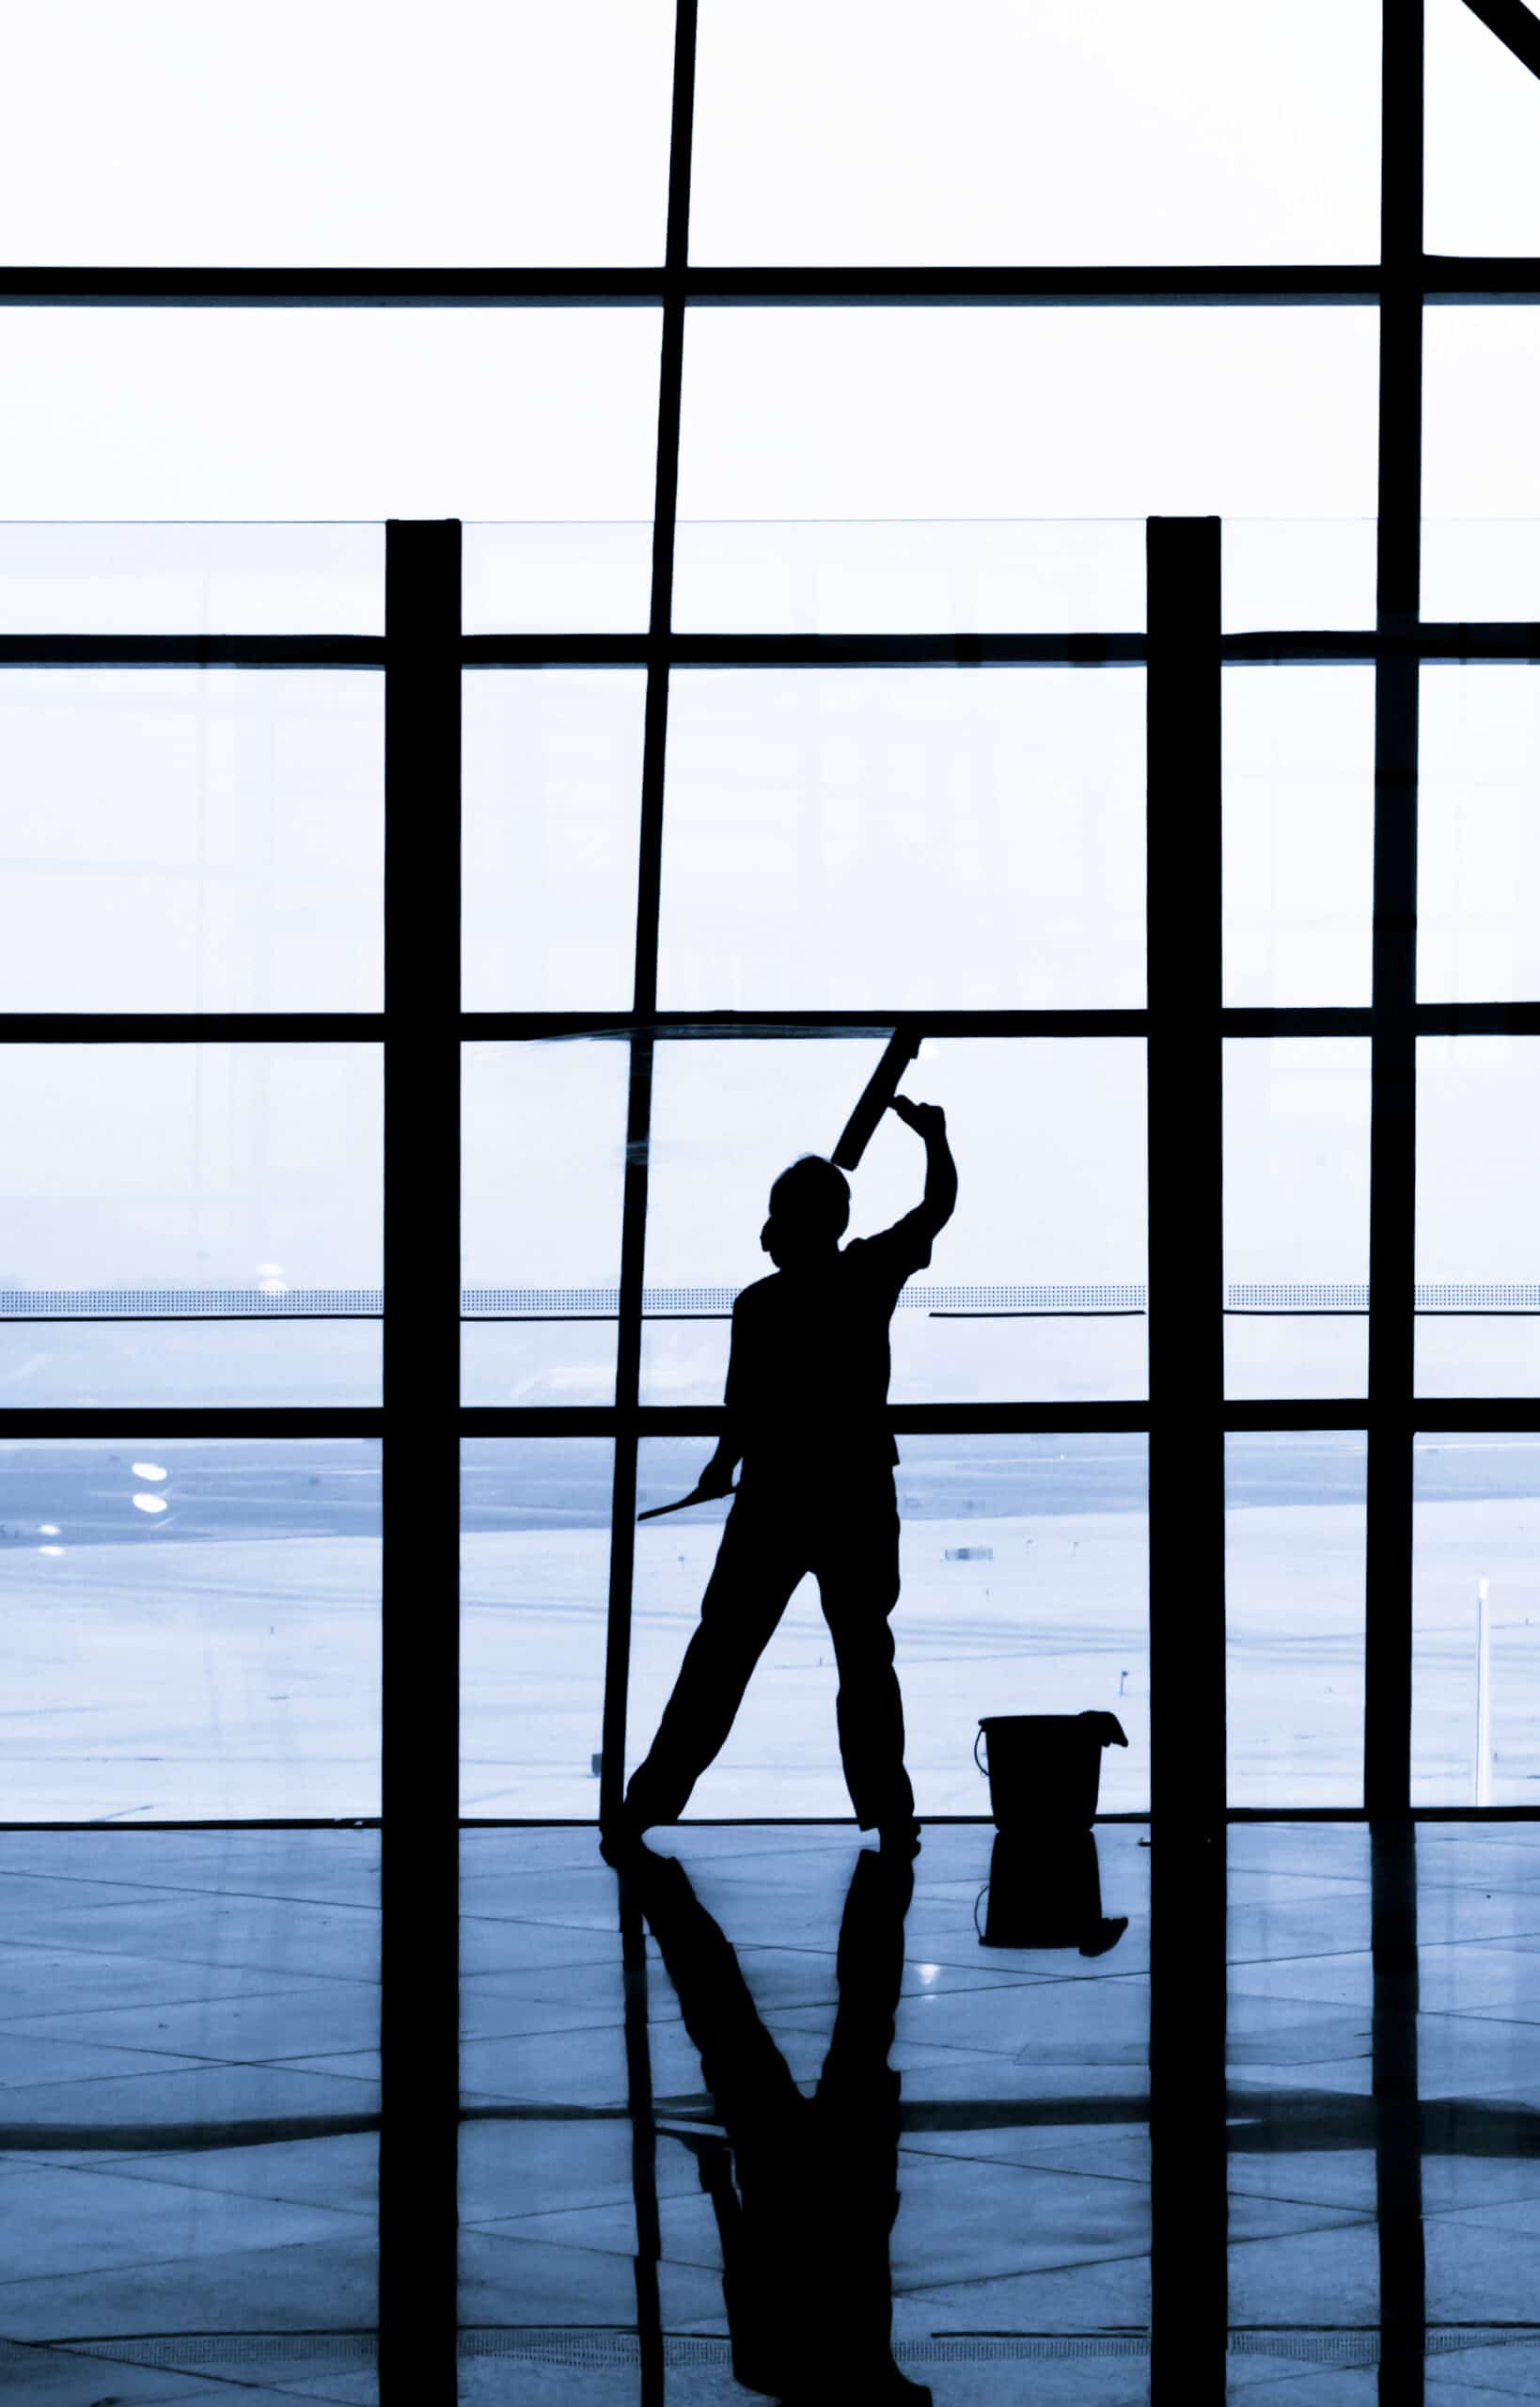 janitor cleaning windows at the airport